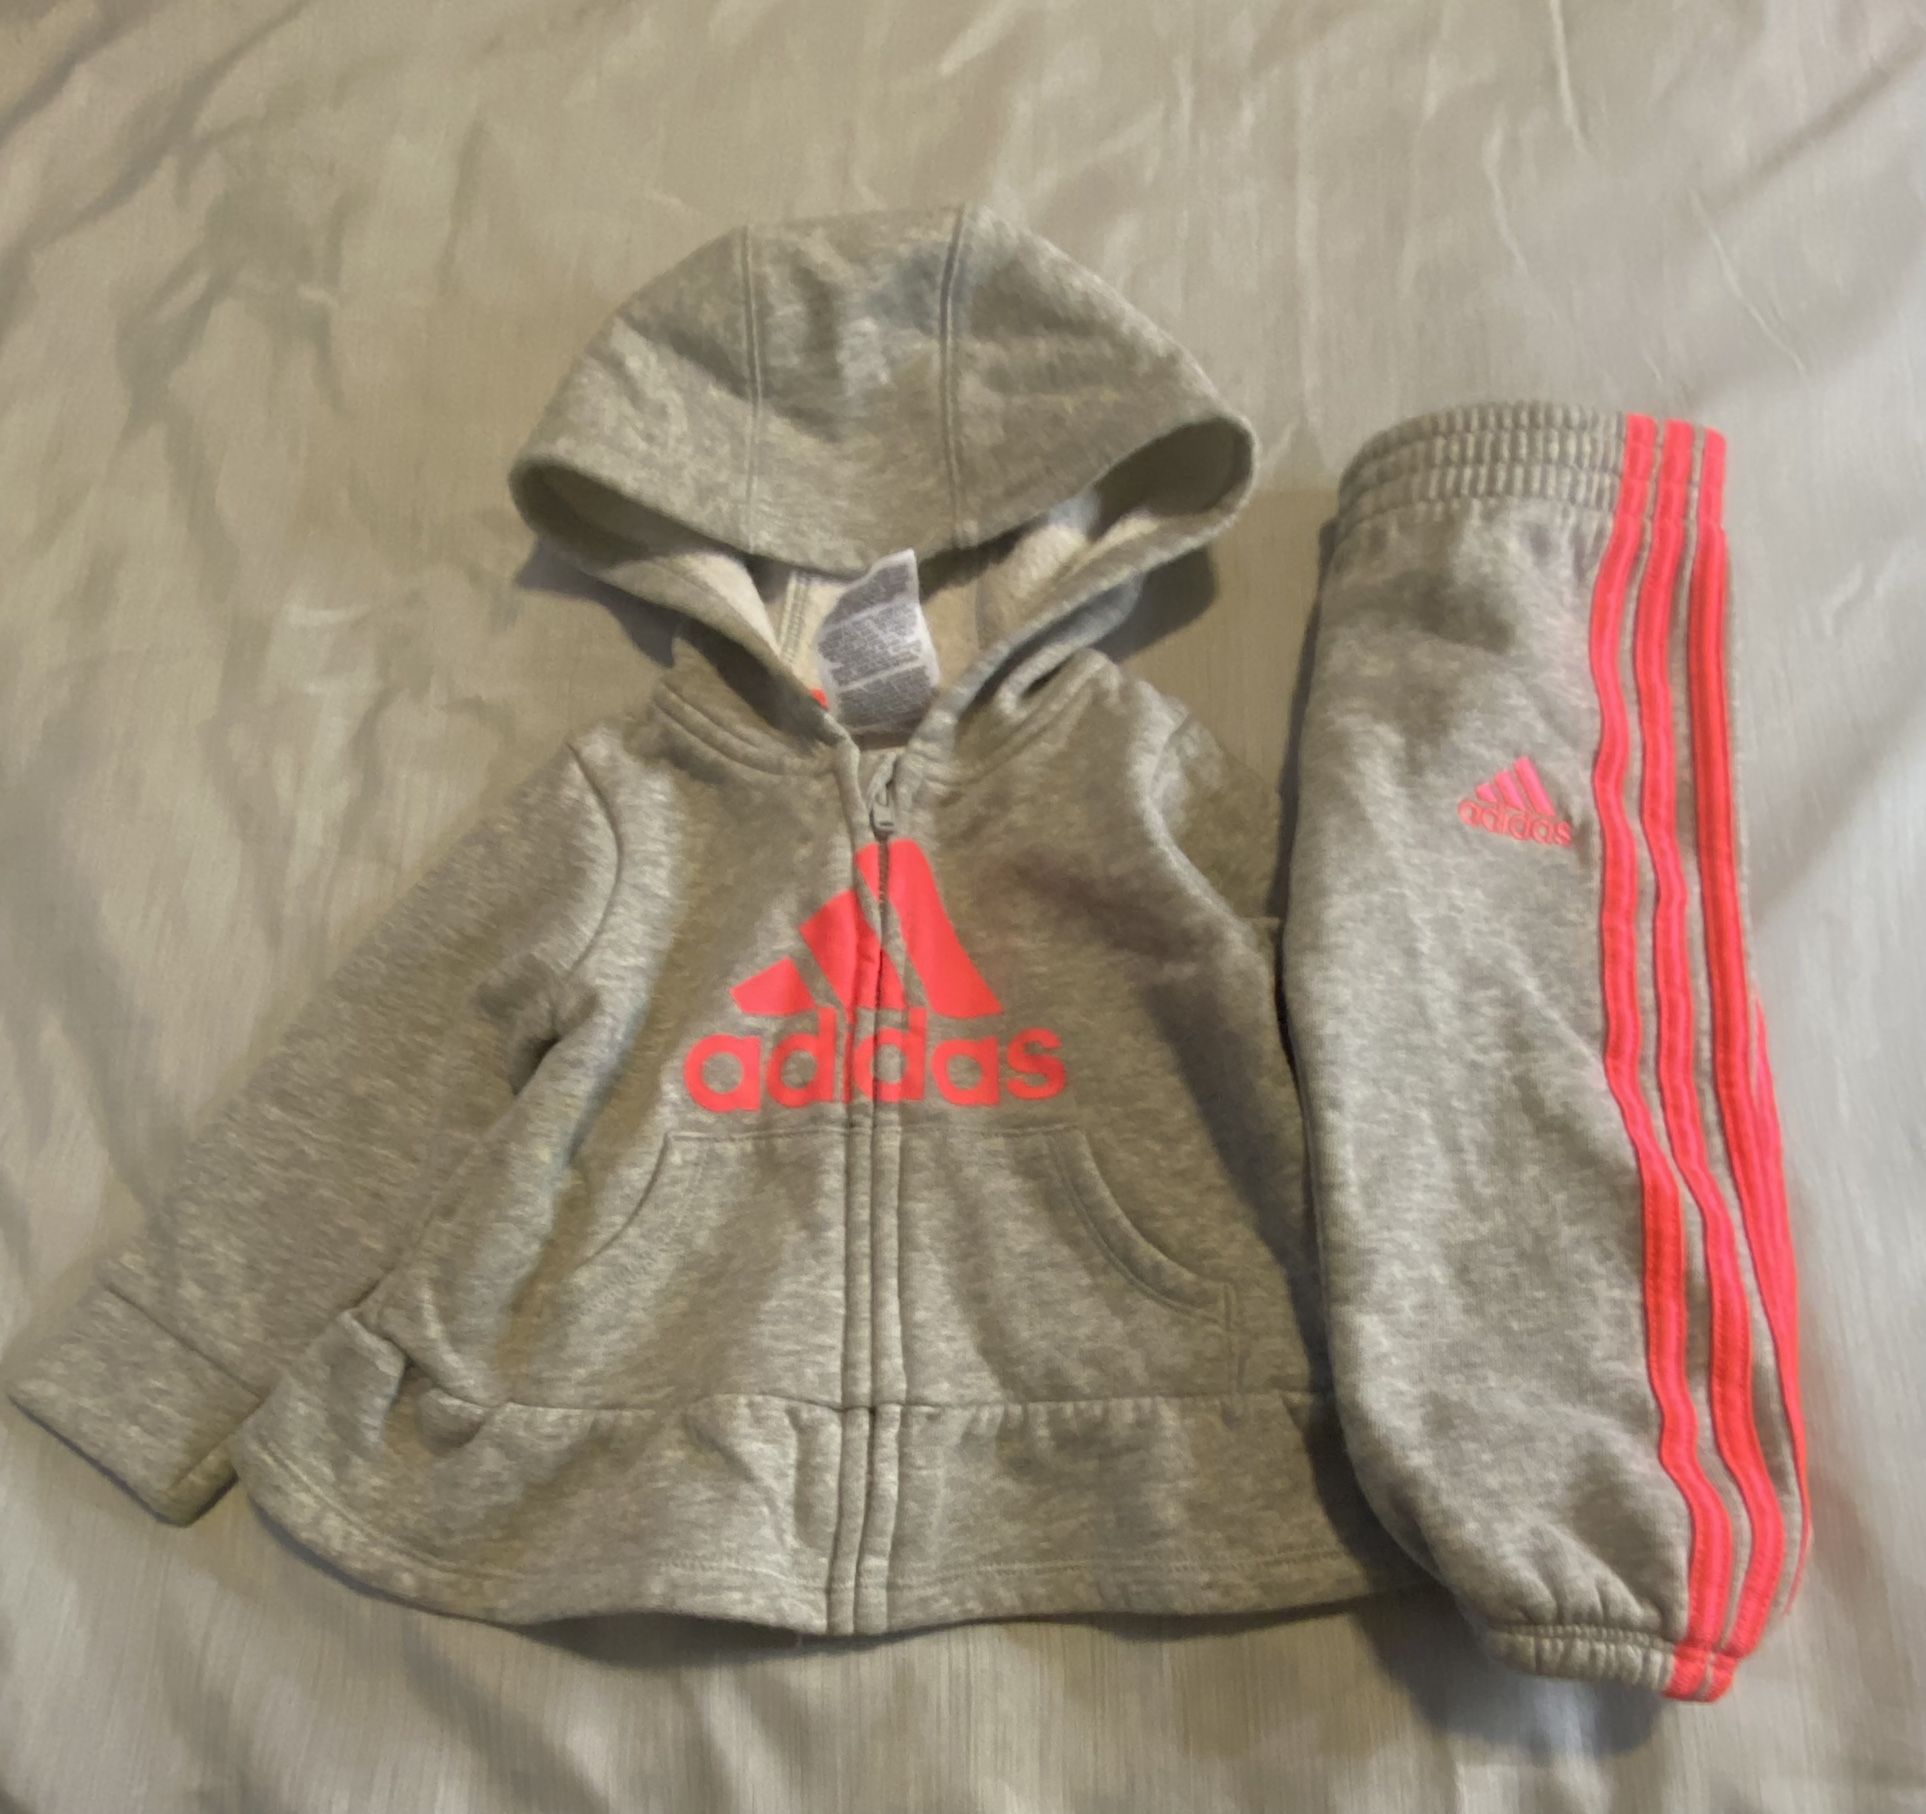 Adidas, Baby Girls, Two-Piece Hooded Set. size, 6M